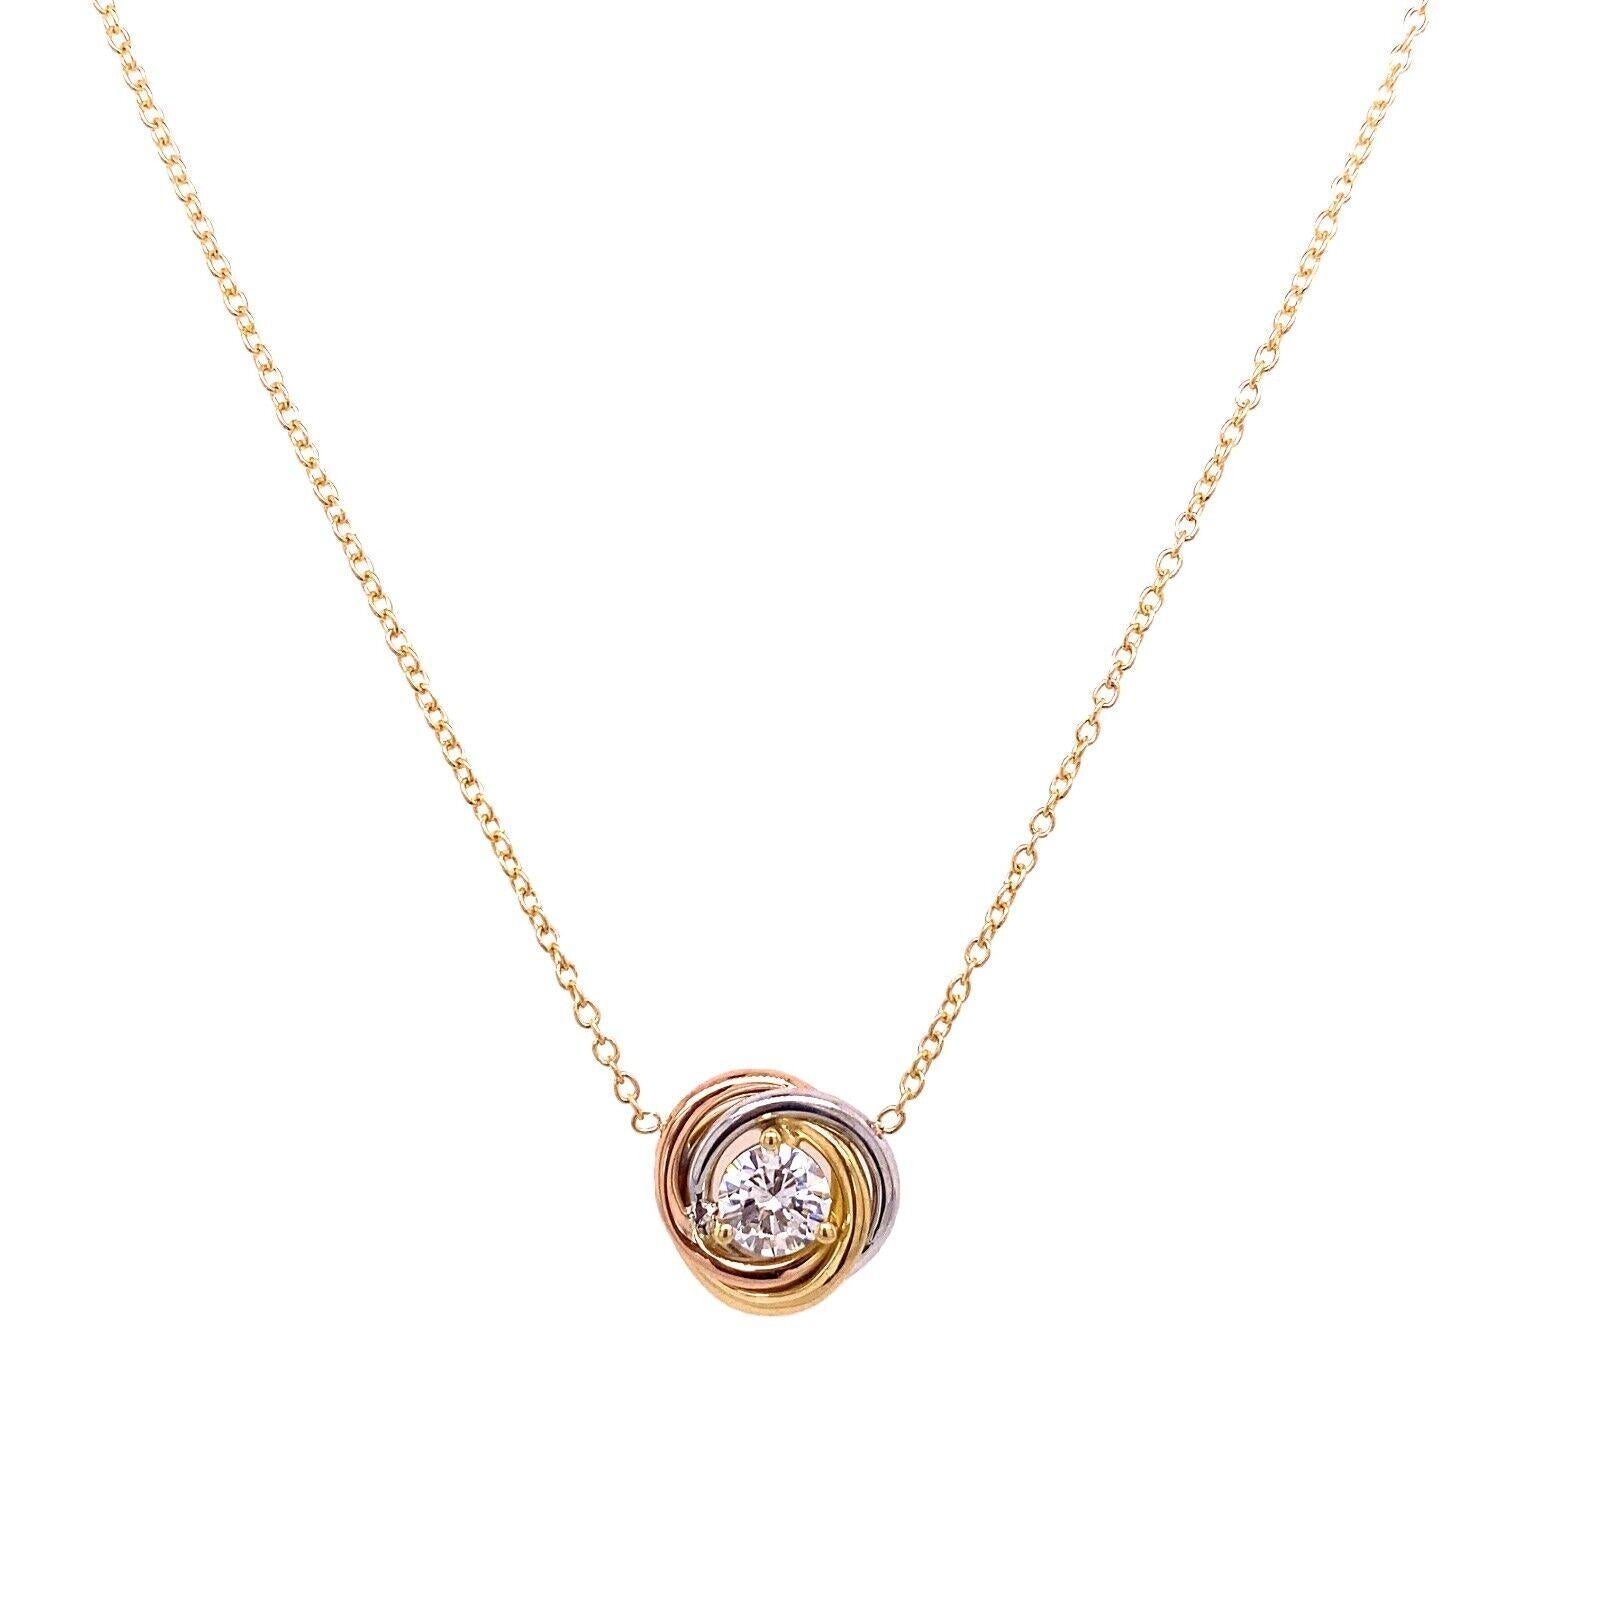 Elegant and simple, this stunning Diamond pendant is crafted in 18ct Yellow, rose and white Gold with a 0.50ct Diamond that is EDR certified. This pendant is set with a 3 Colour Gold Diamond and is a must have for any jewellery